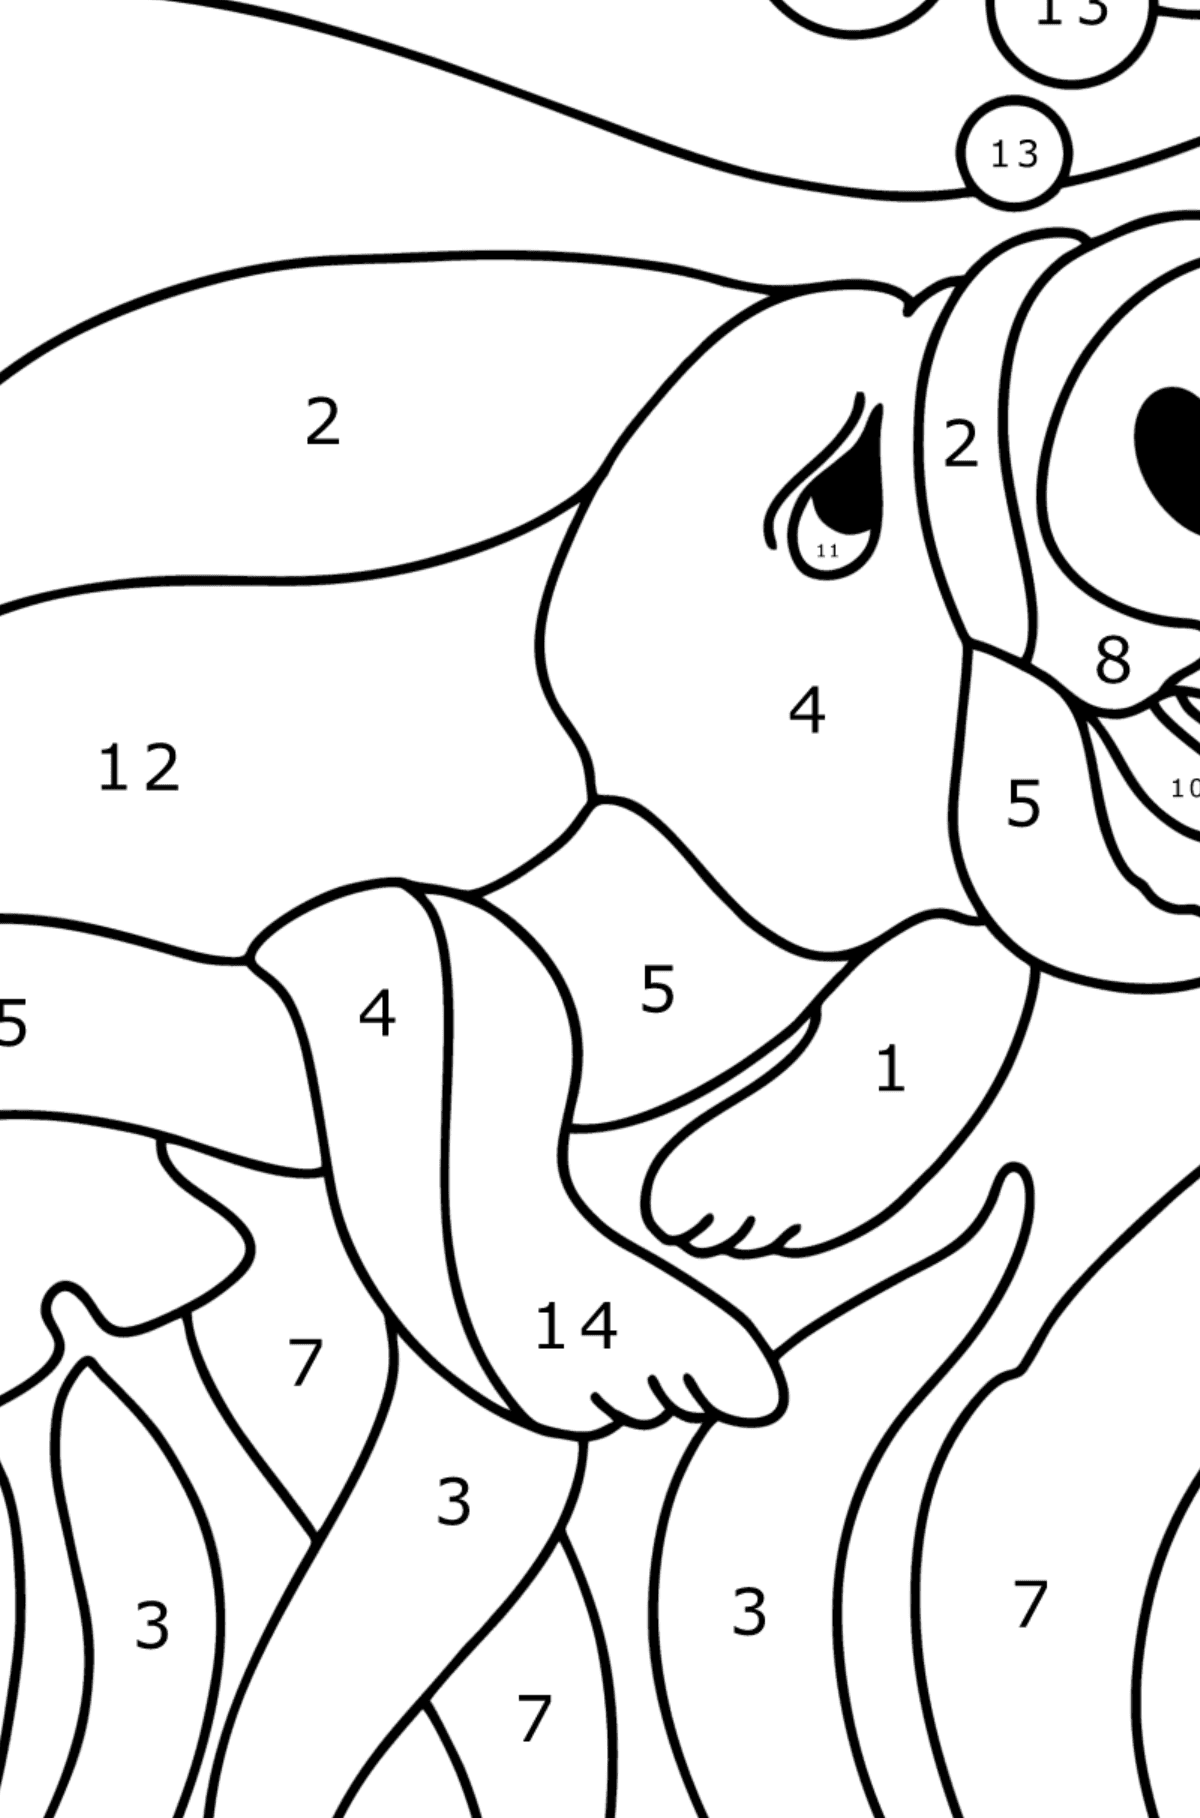 Stellar Cow coloring page - Coloring by Numbers for Kids